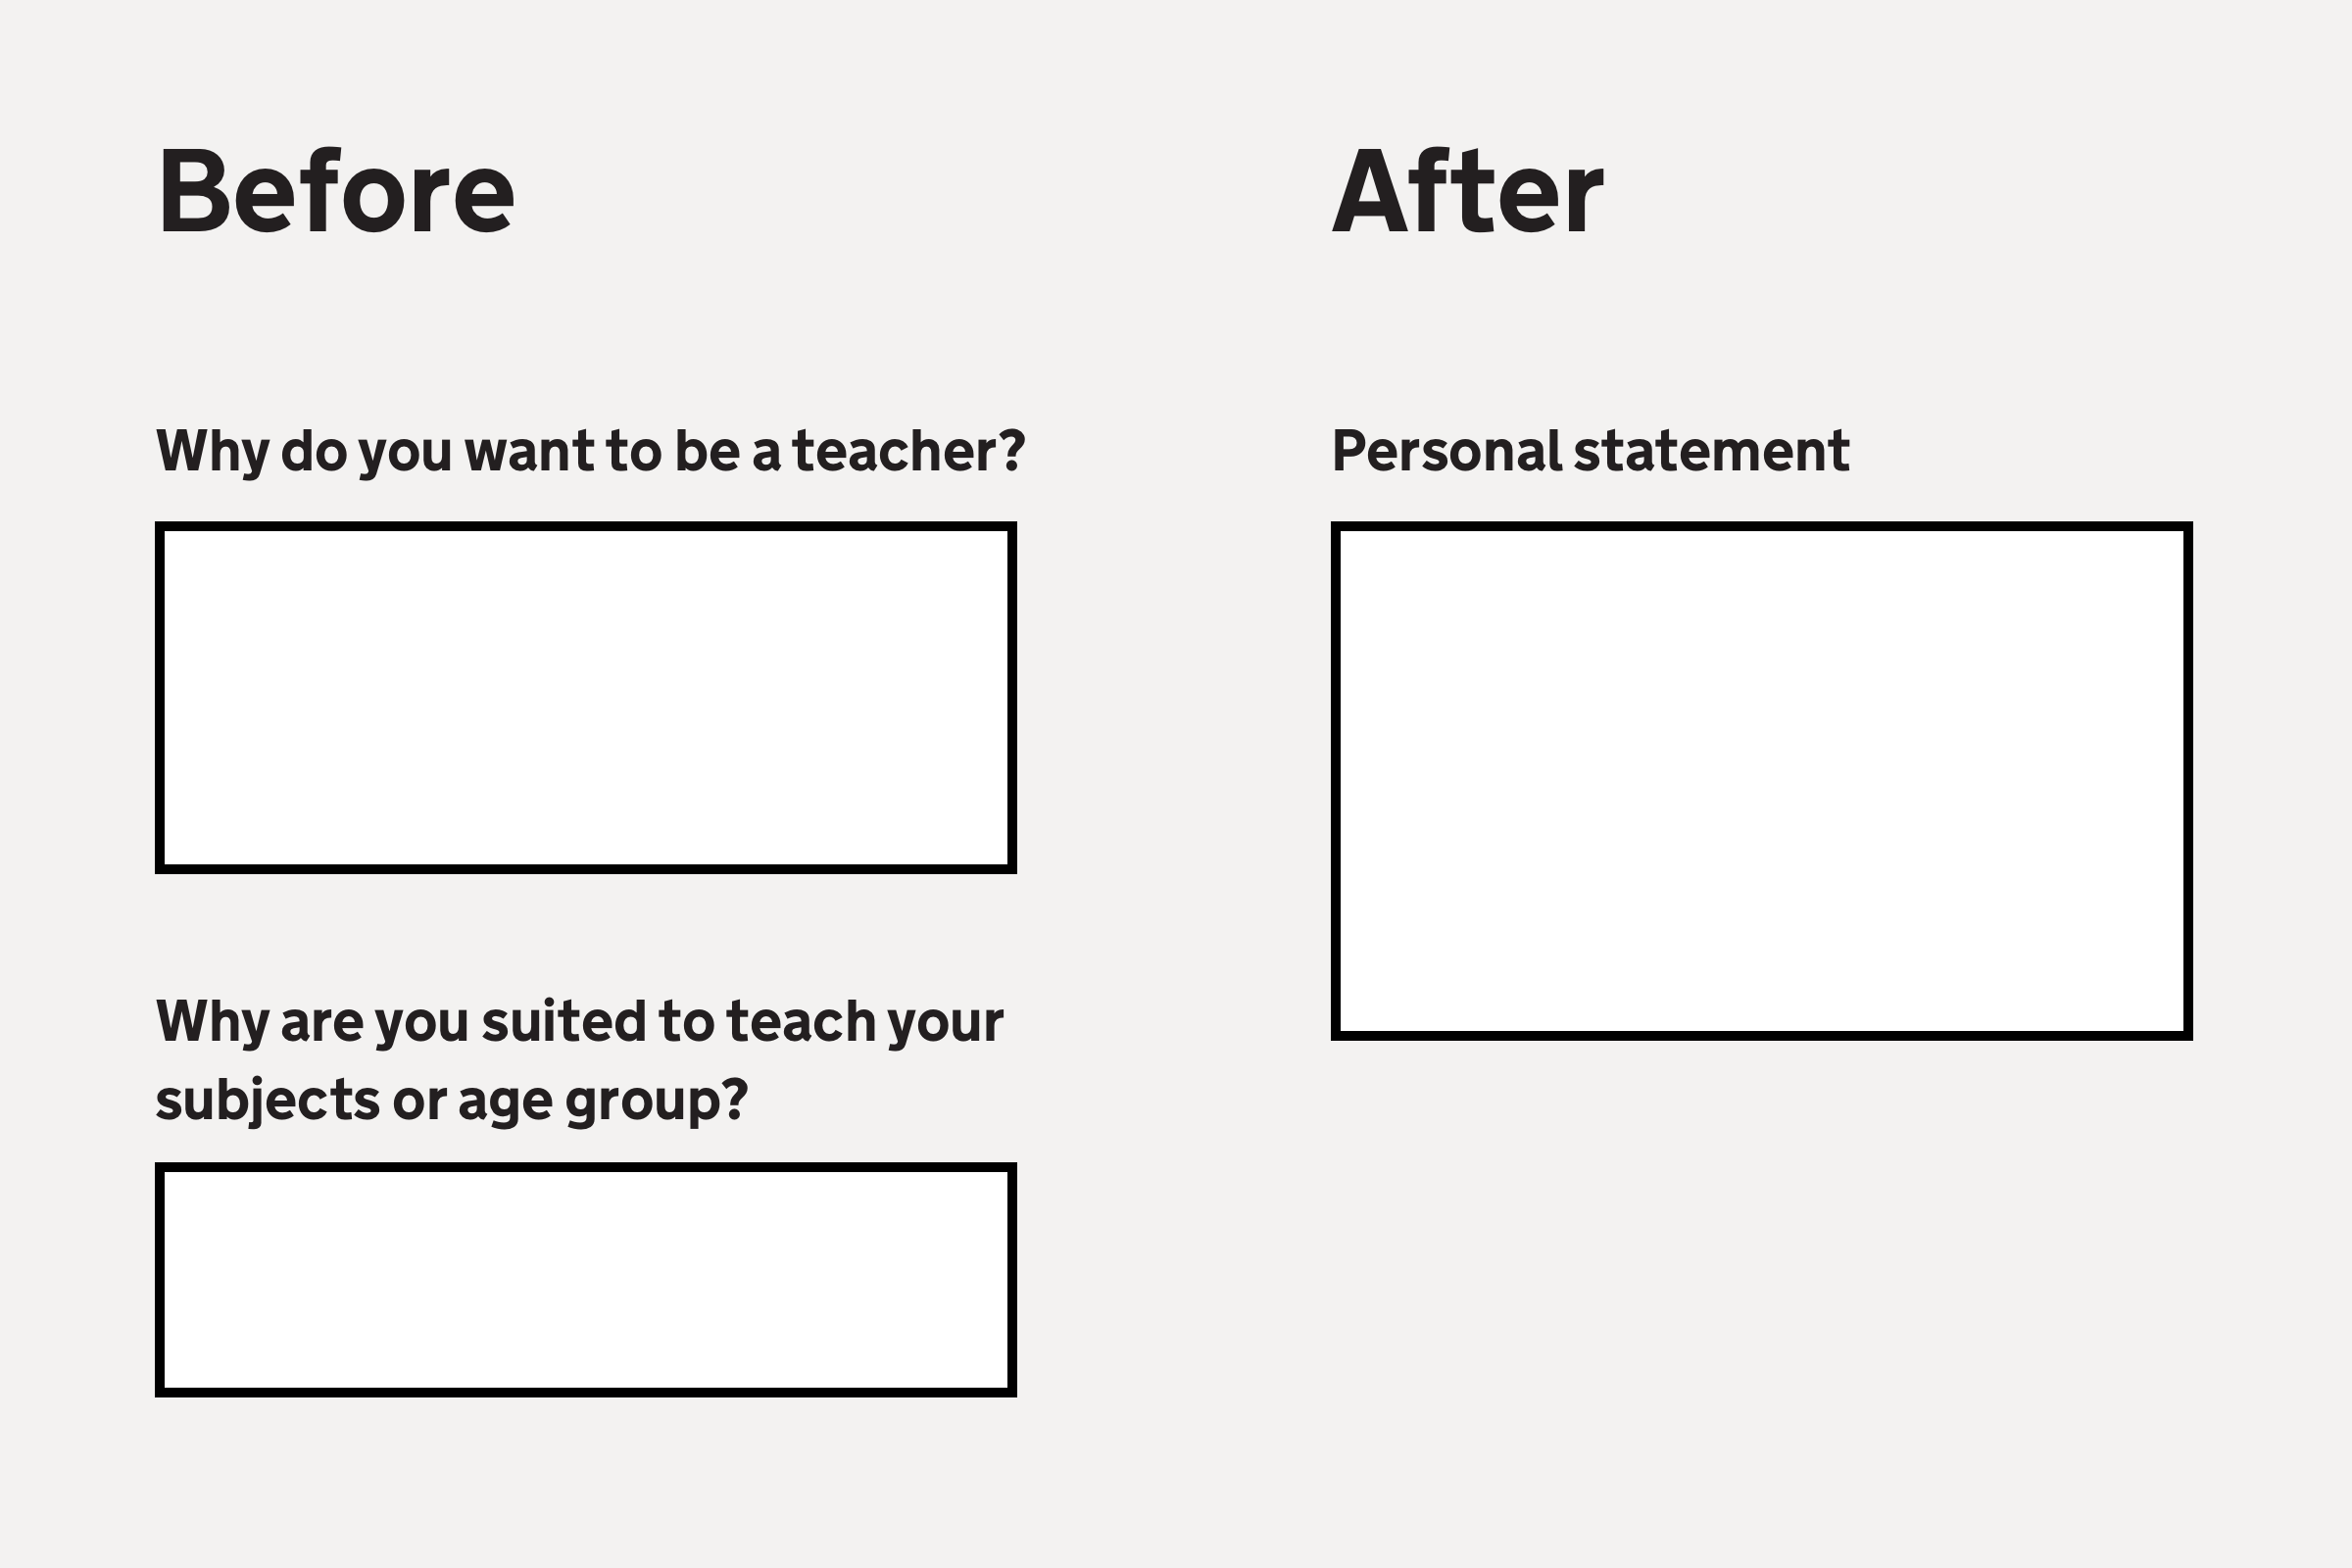 Illustration with the text 'Before' on the left and 'After' on the right. Below 'Before', two text boxes with the headings 'Why do you want to be a teacher?' and 'Why are you suited to teach your subjects or age group?' Below 'After', a single tex box with the heading 'Personal statement'.